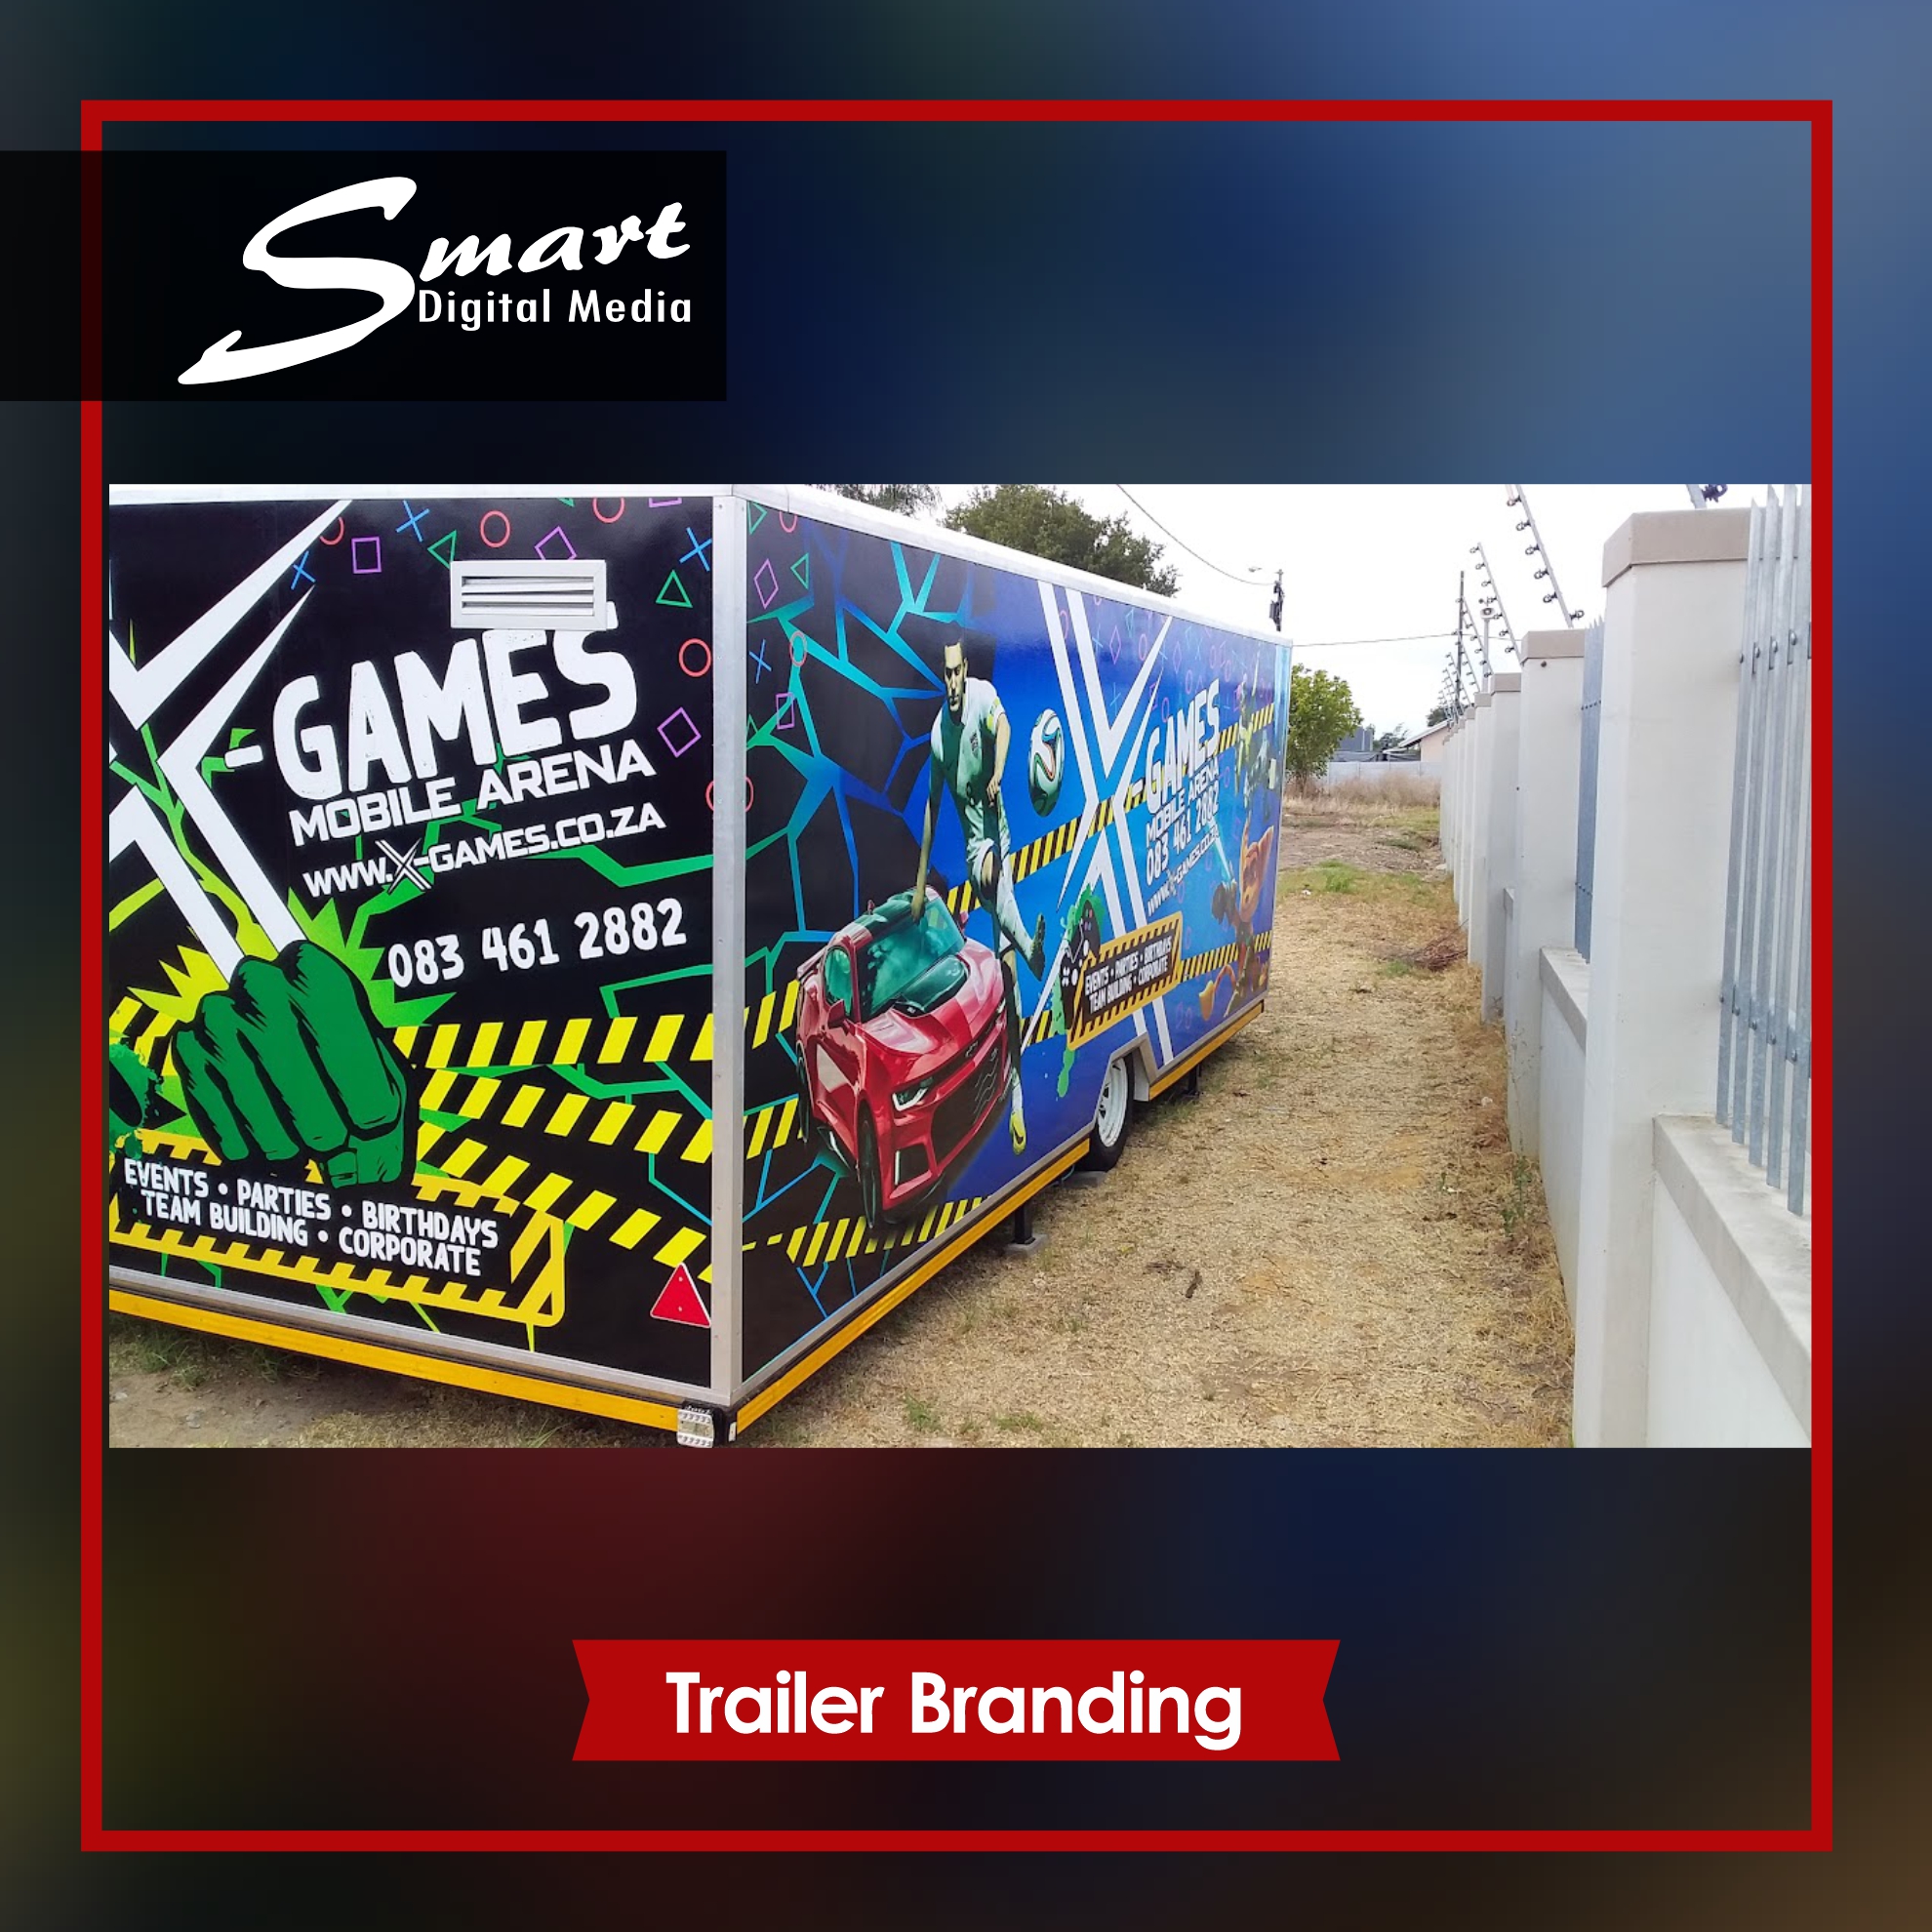 Blue trailer with various video game characters displayed for GAMES mobile arena. Trailer is based on roadside.